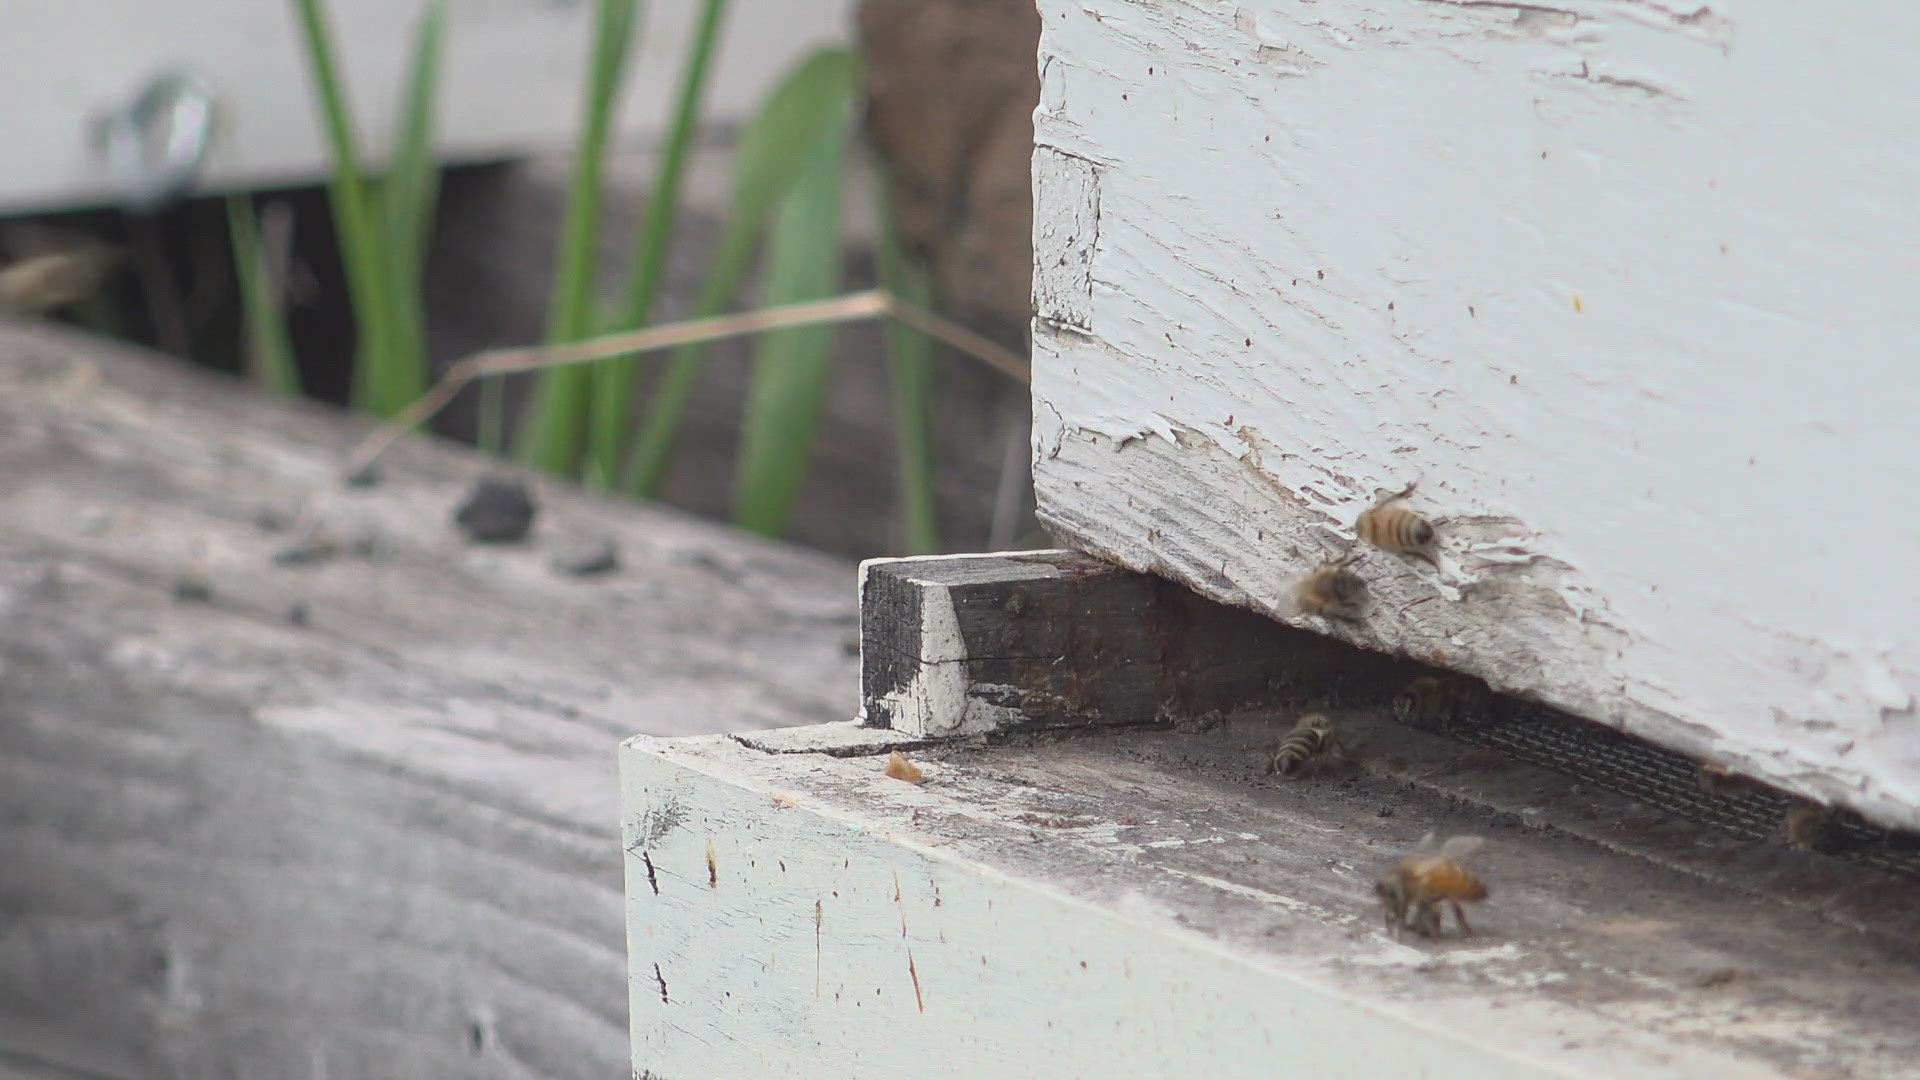 20,000 - 30,000 bees were saved after an accident in the West Plains.